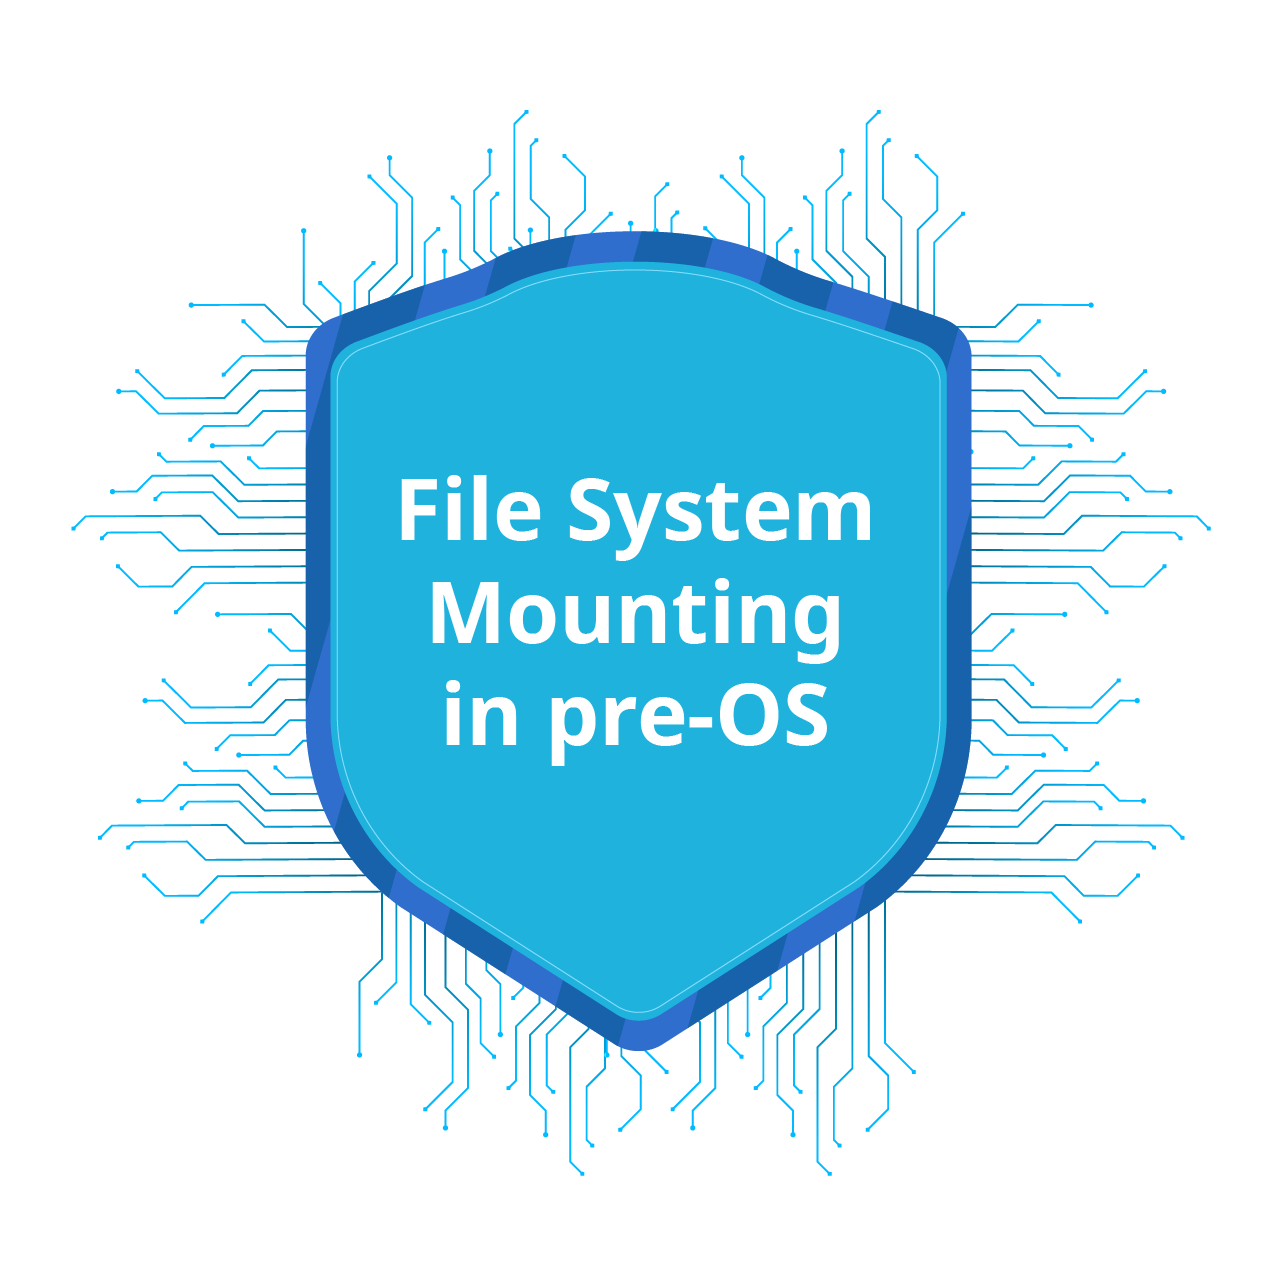 Scan the file system before it even starts!